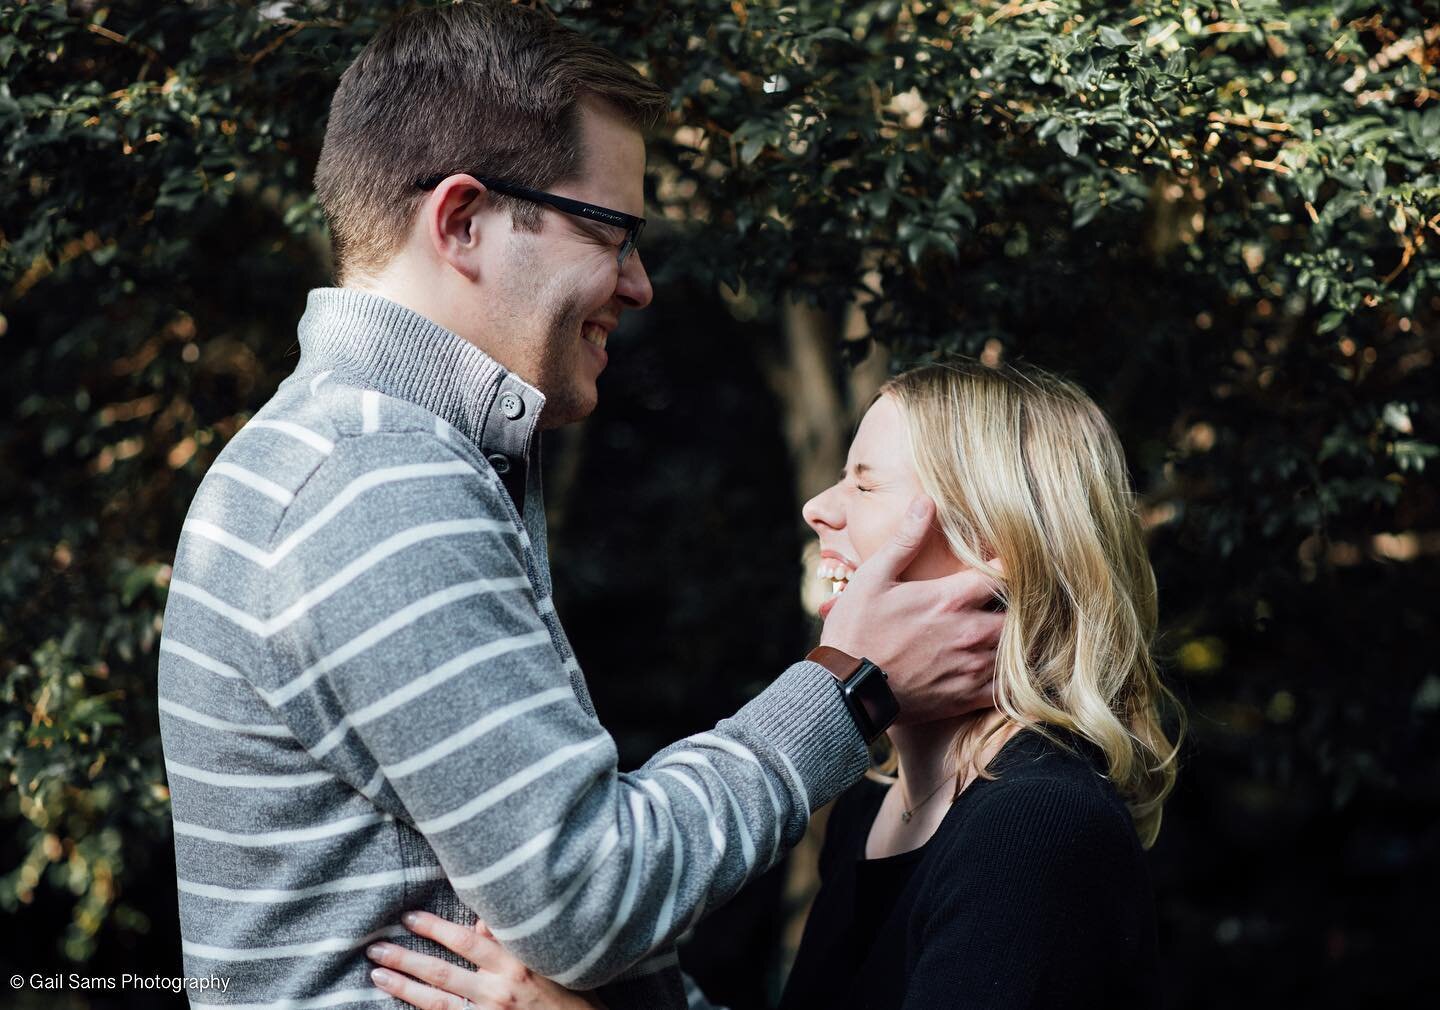 A beautiful post-proposal engagement session at Longwood Gardens! Congrats to Hope &amp; Cole!